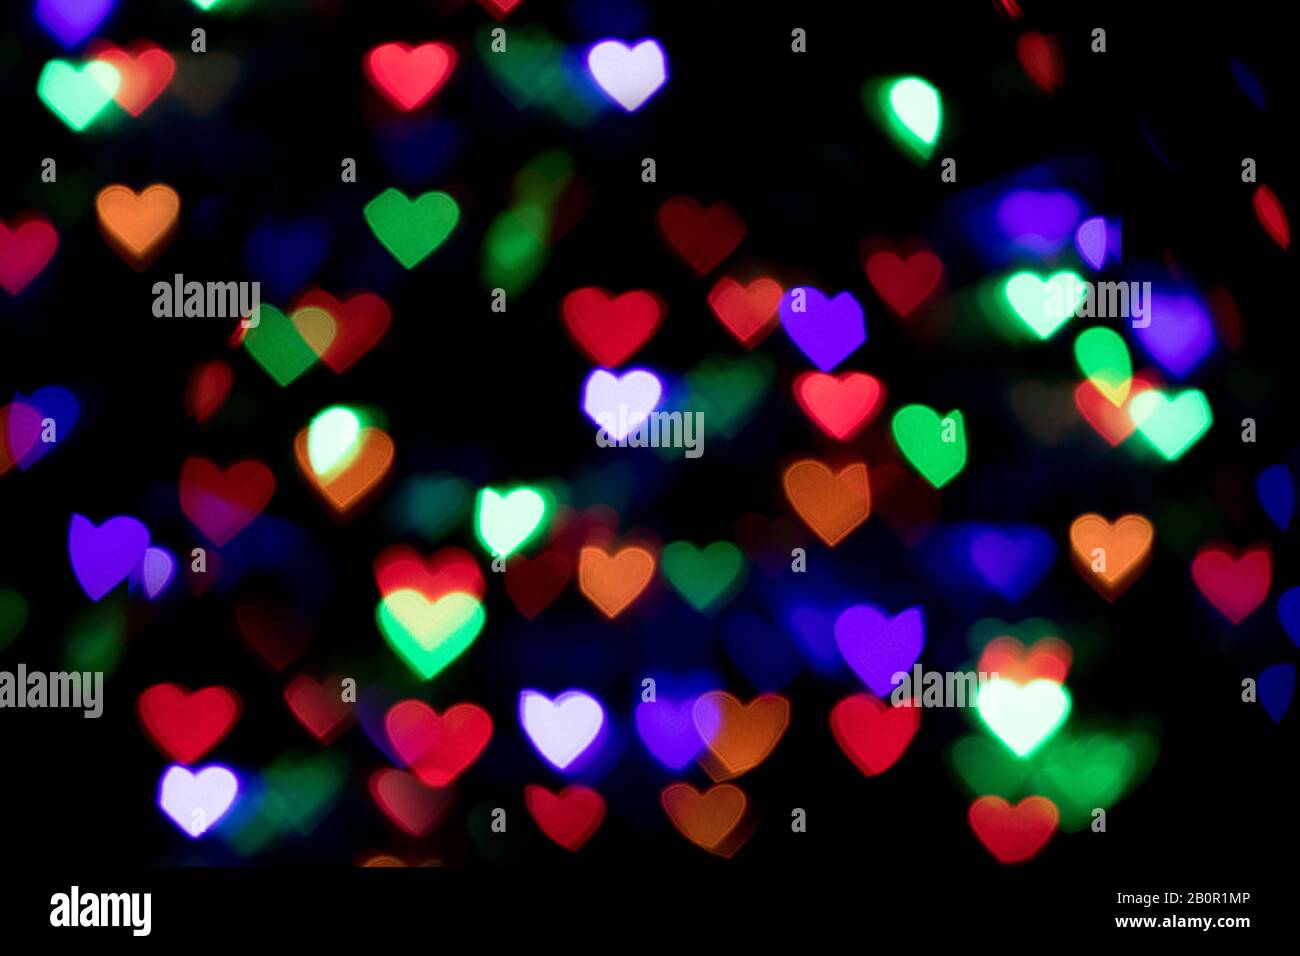 colorful heart bokeh background. Valentine's day background Stock Photo